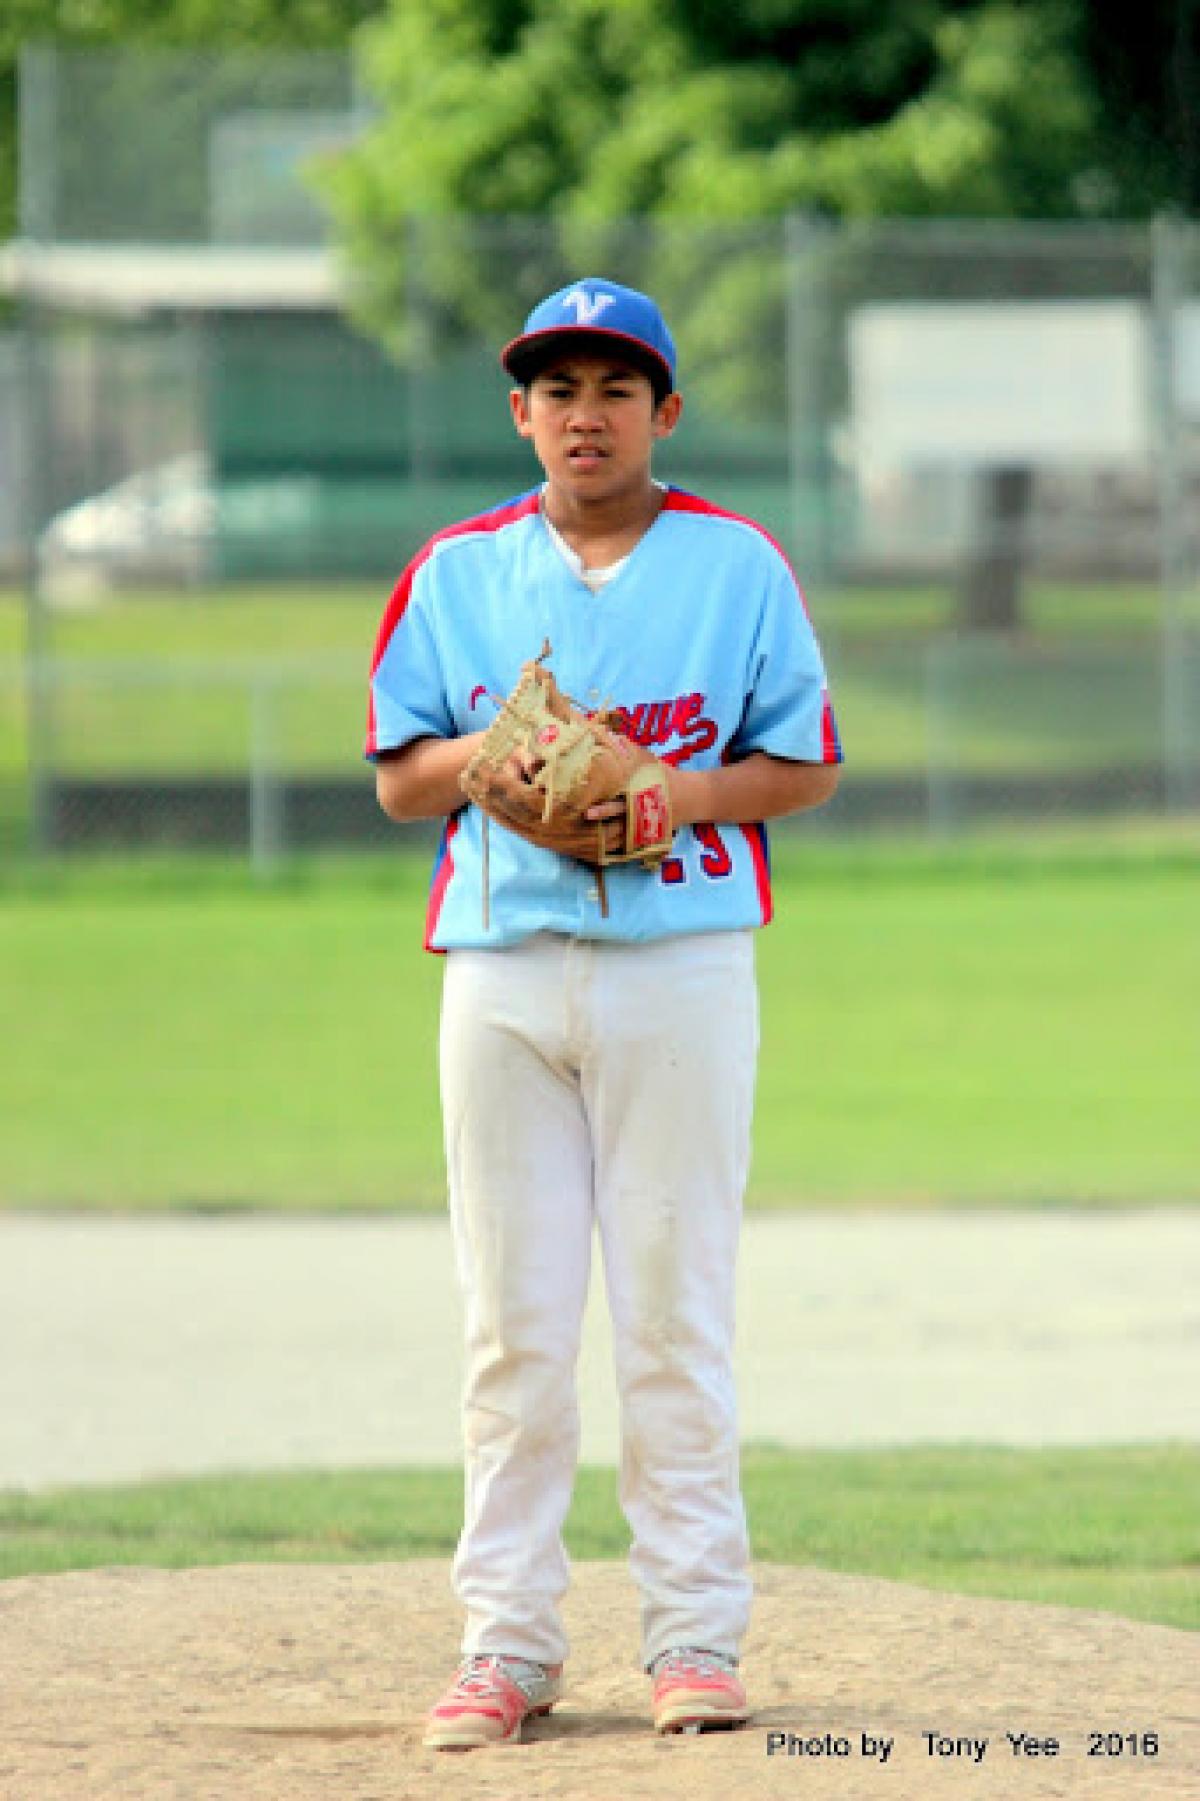 Expos Split The 4 Game Weekend; Disappointing Sunday Drops VanMinor Just Below Provincial Qualification Line Heading Into May Long Weekend Tournament 